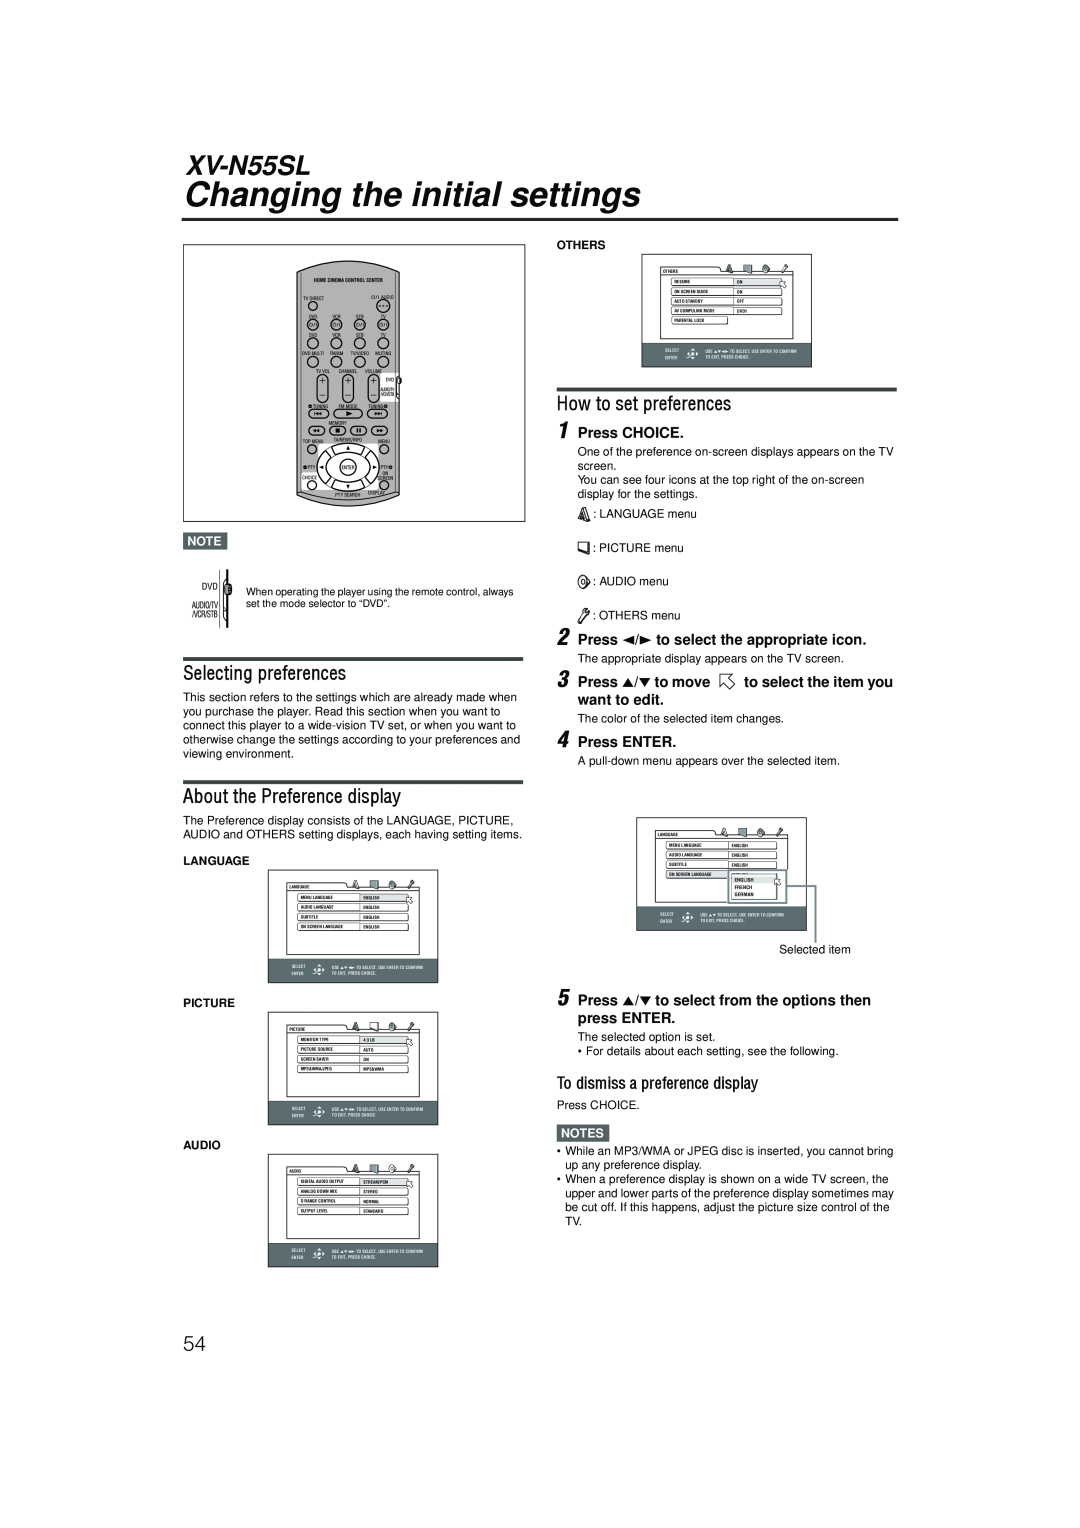 JVC LVT1002-001B Changing the initial settings, Selecting preferences, How to set preferences, Press CHOICE, XV-N55SL 